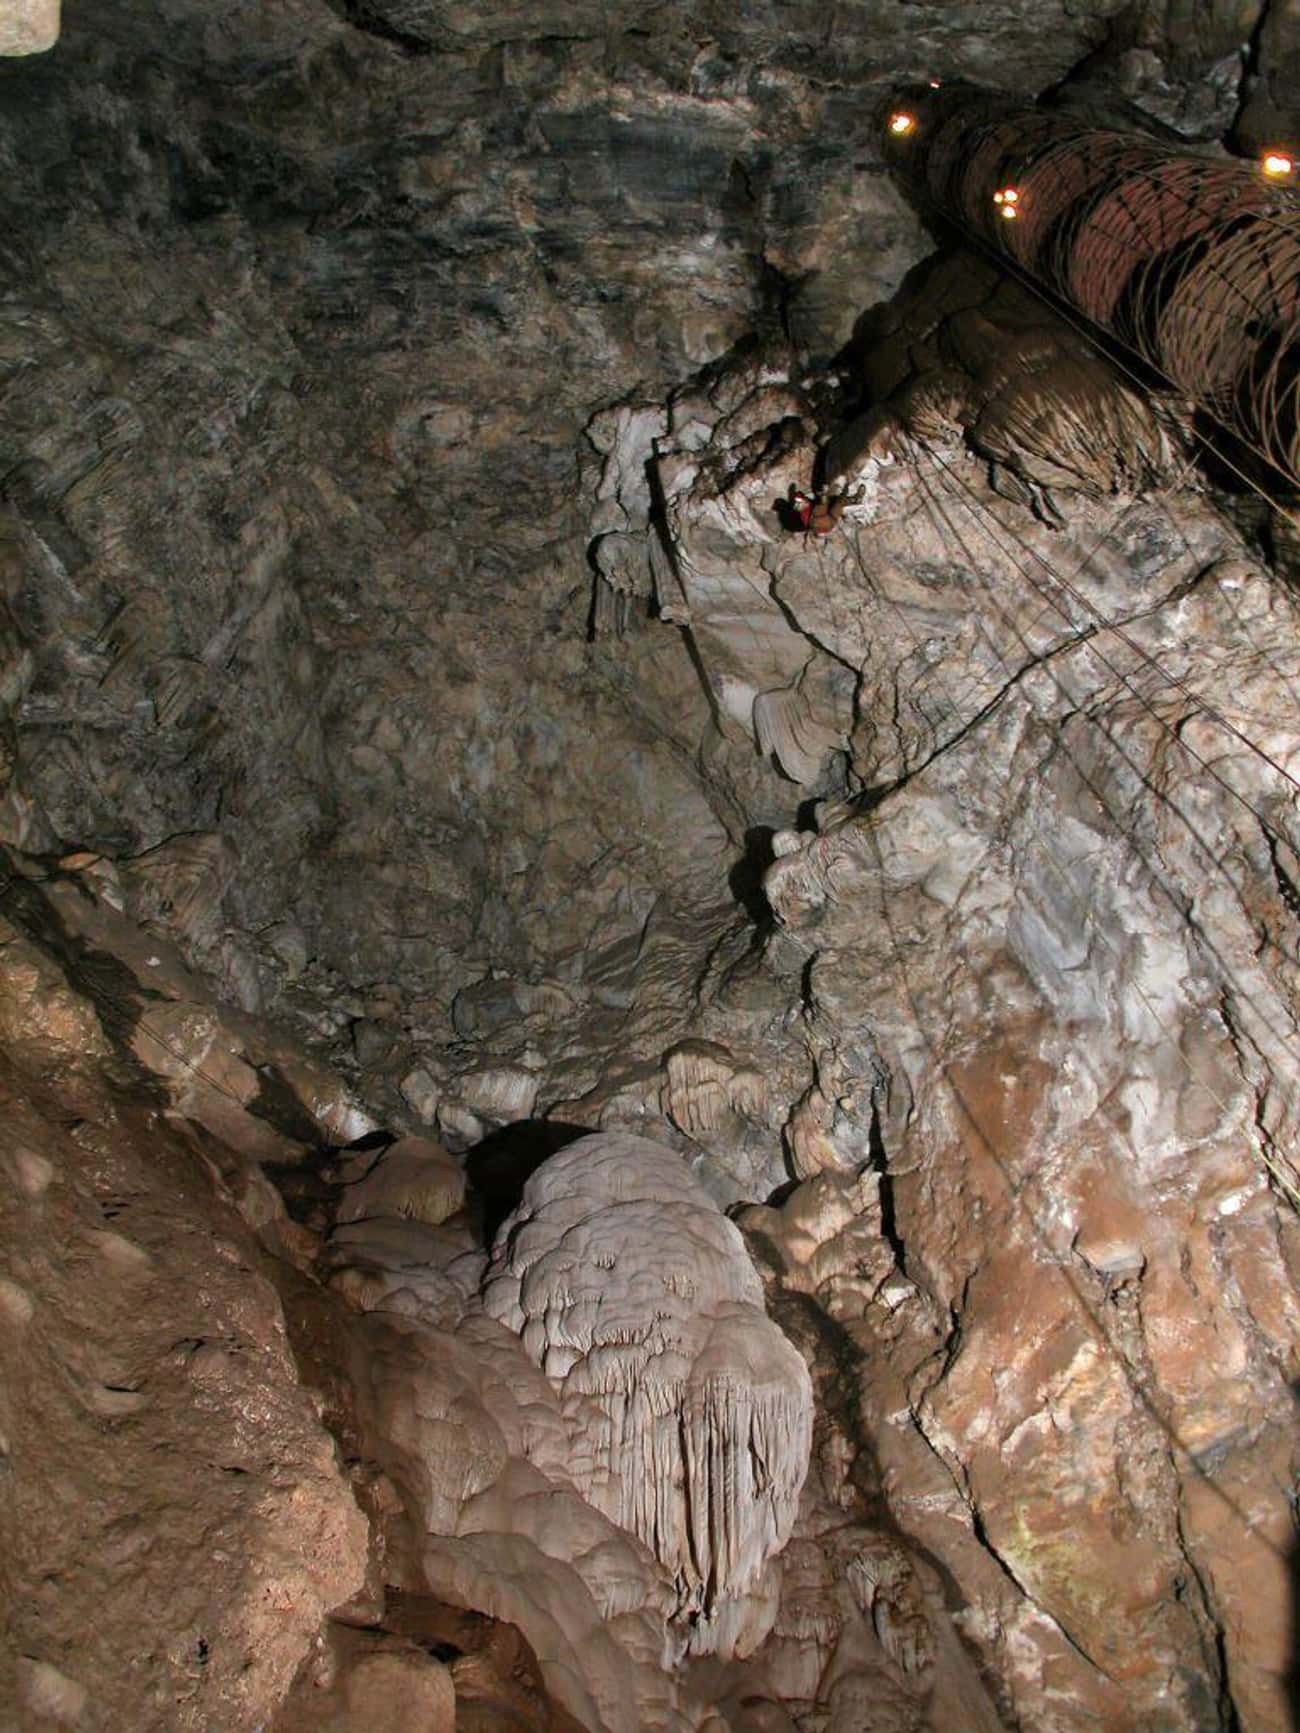 The Moaning Cavern